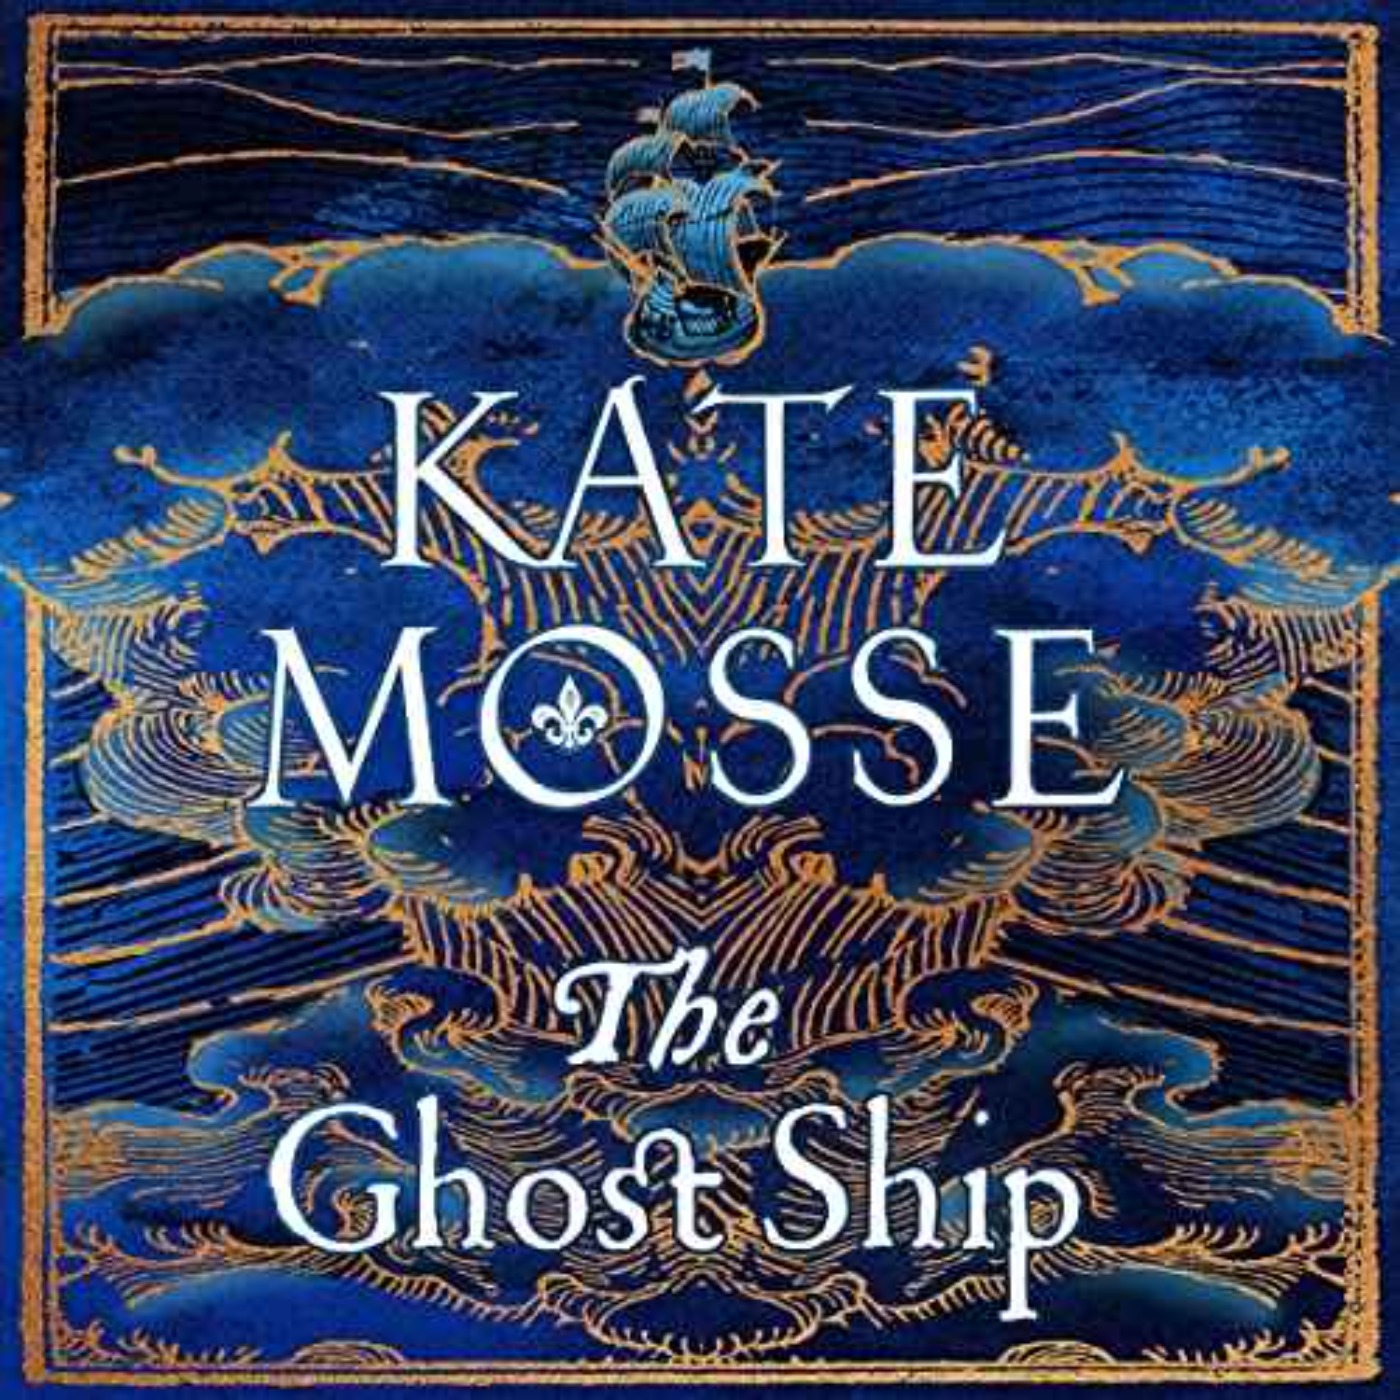 Little Atoms 844 - Kate Mosse's The Ghost Ship